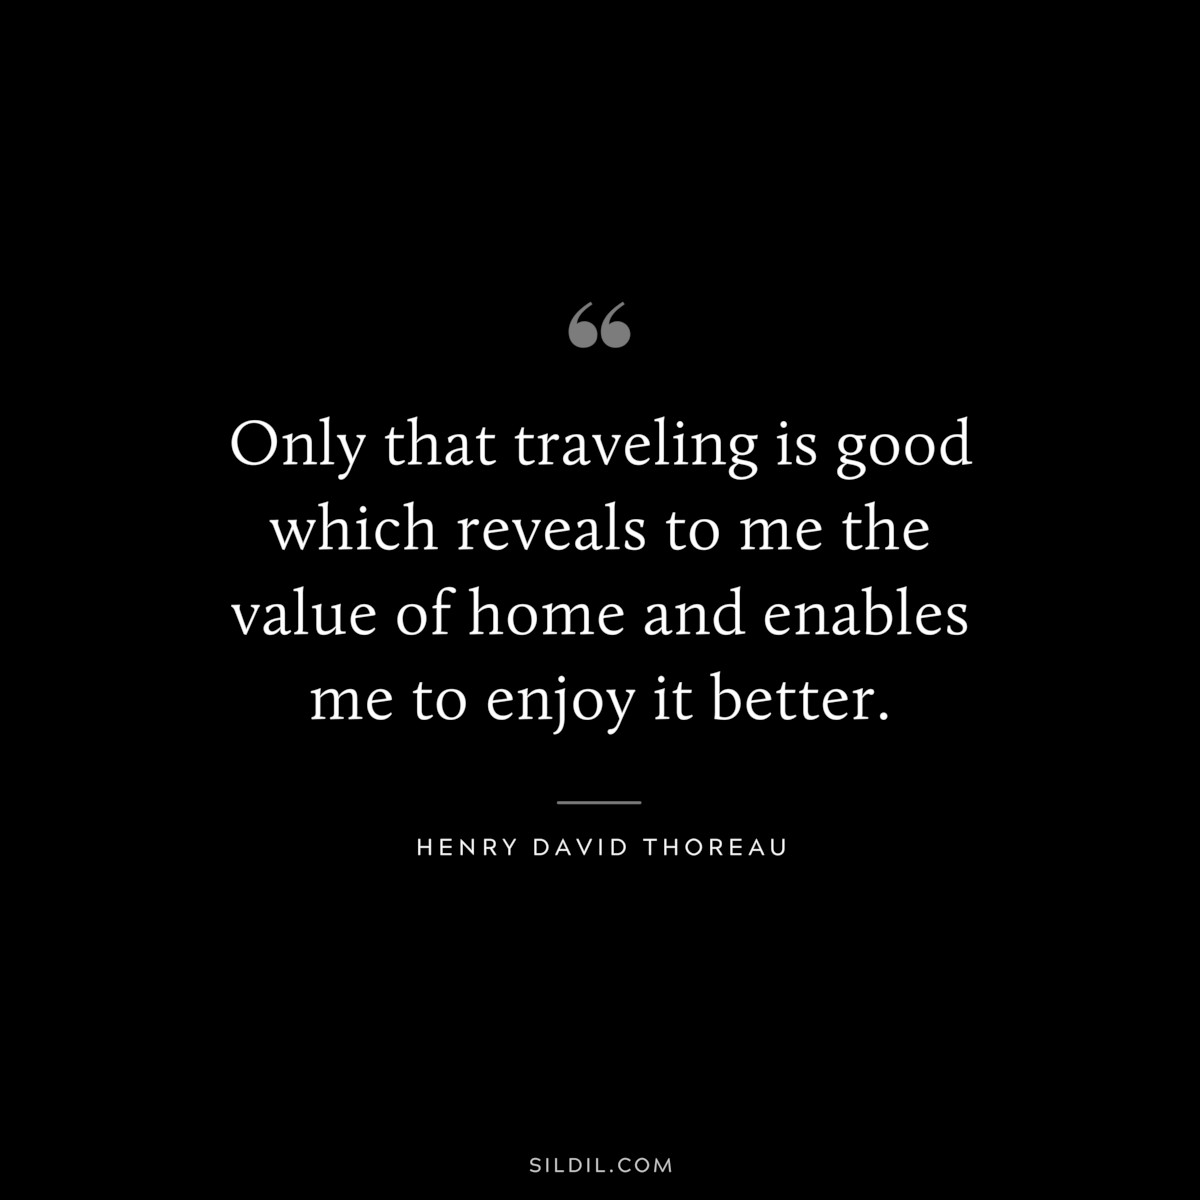 Only that traveling is good which reveals to me the value of home and enables me to enjoy it better. — Henry David Thoreau